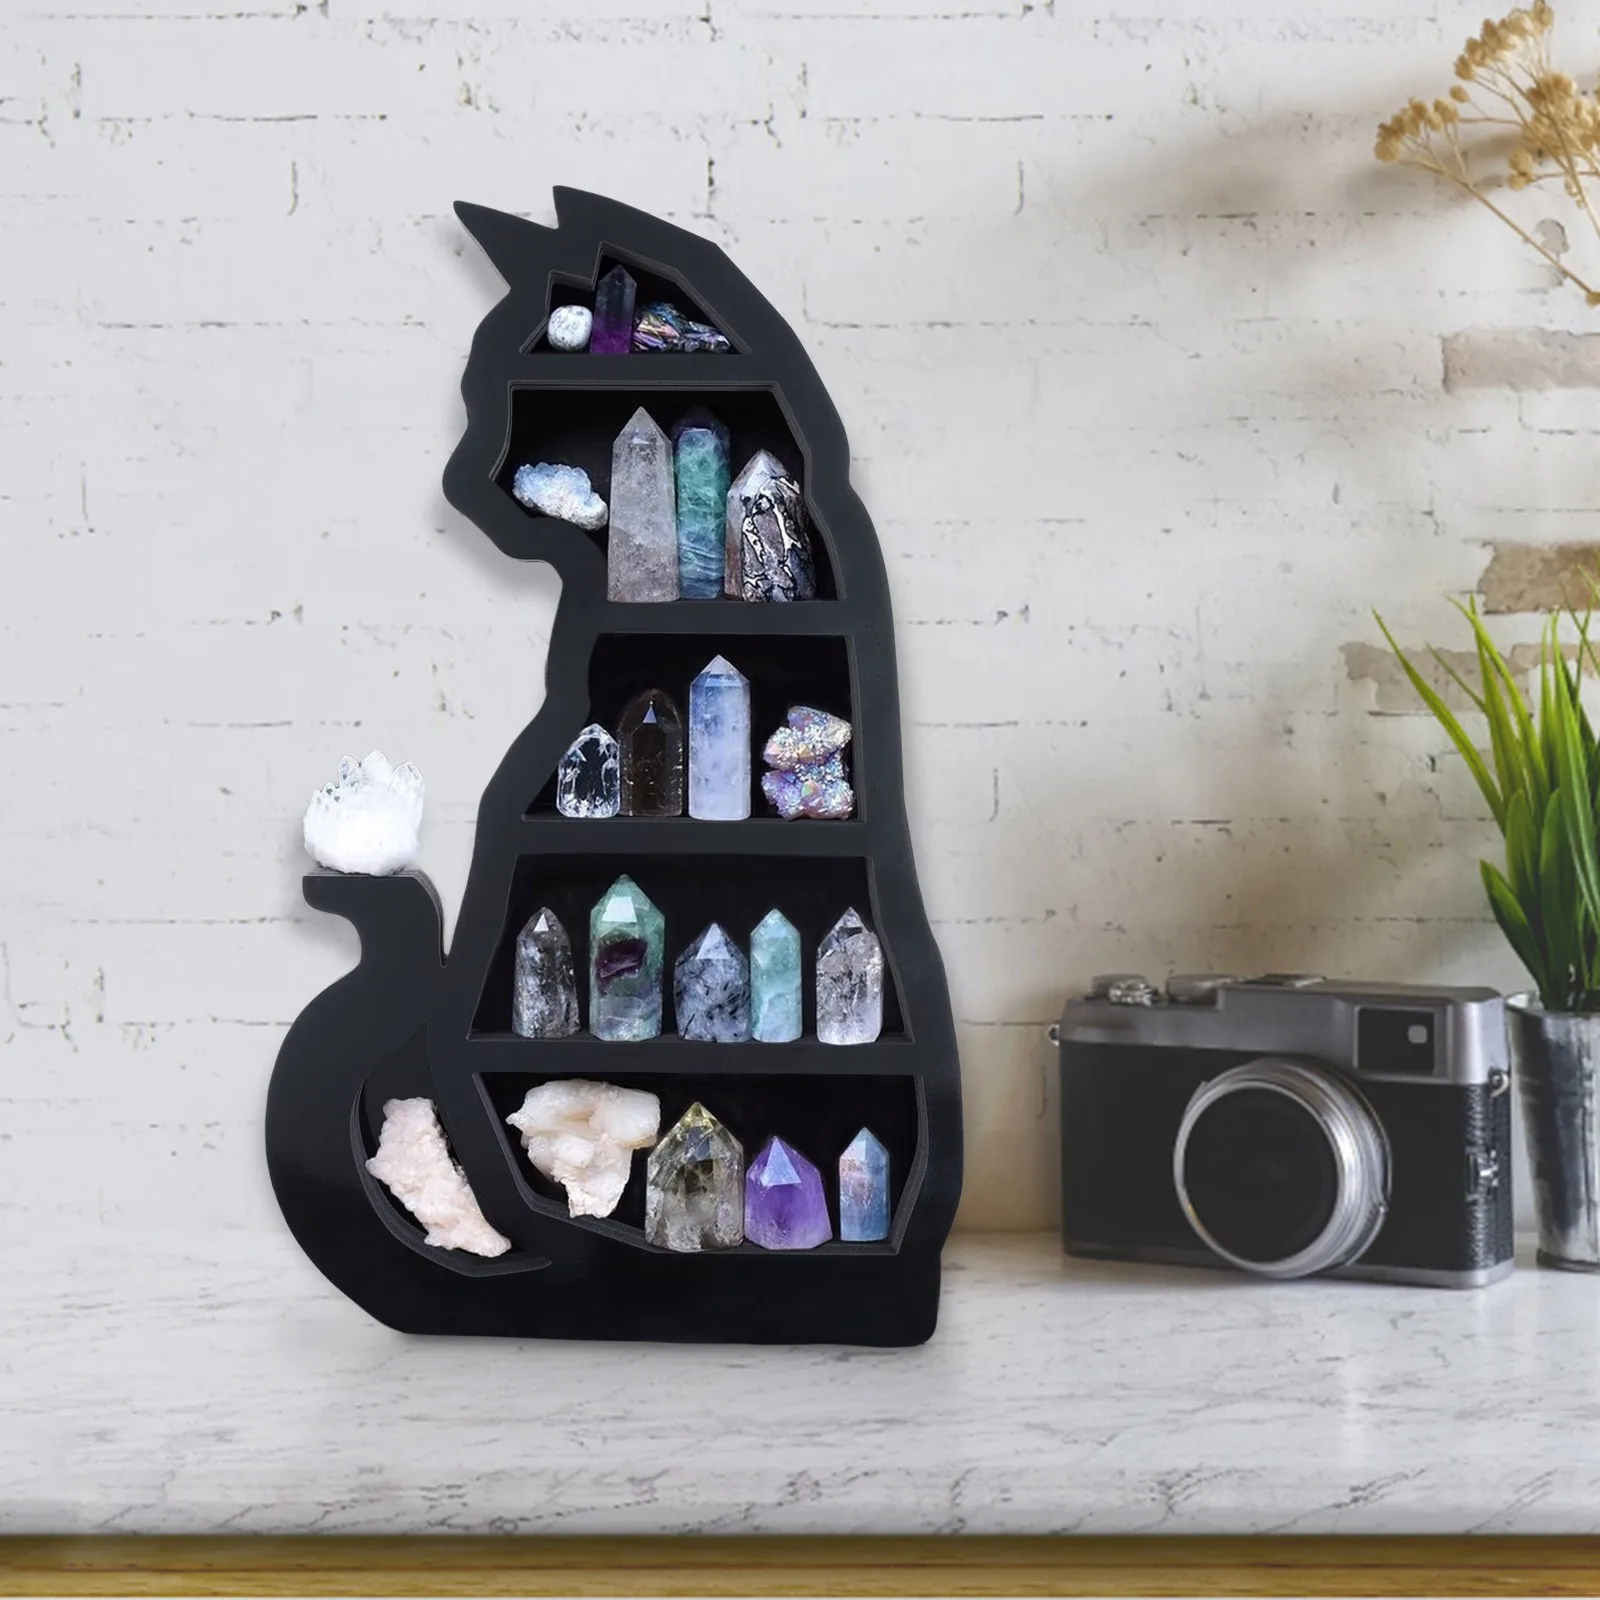 Cat and Moon Wooden Shelf for home decor10